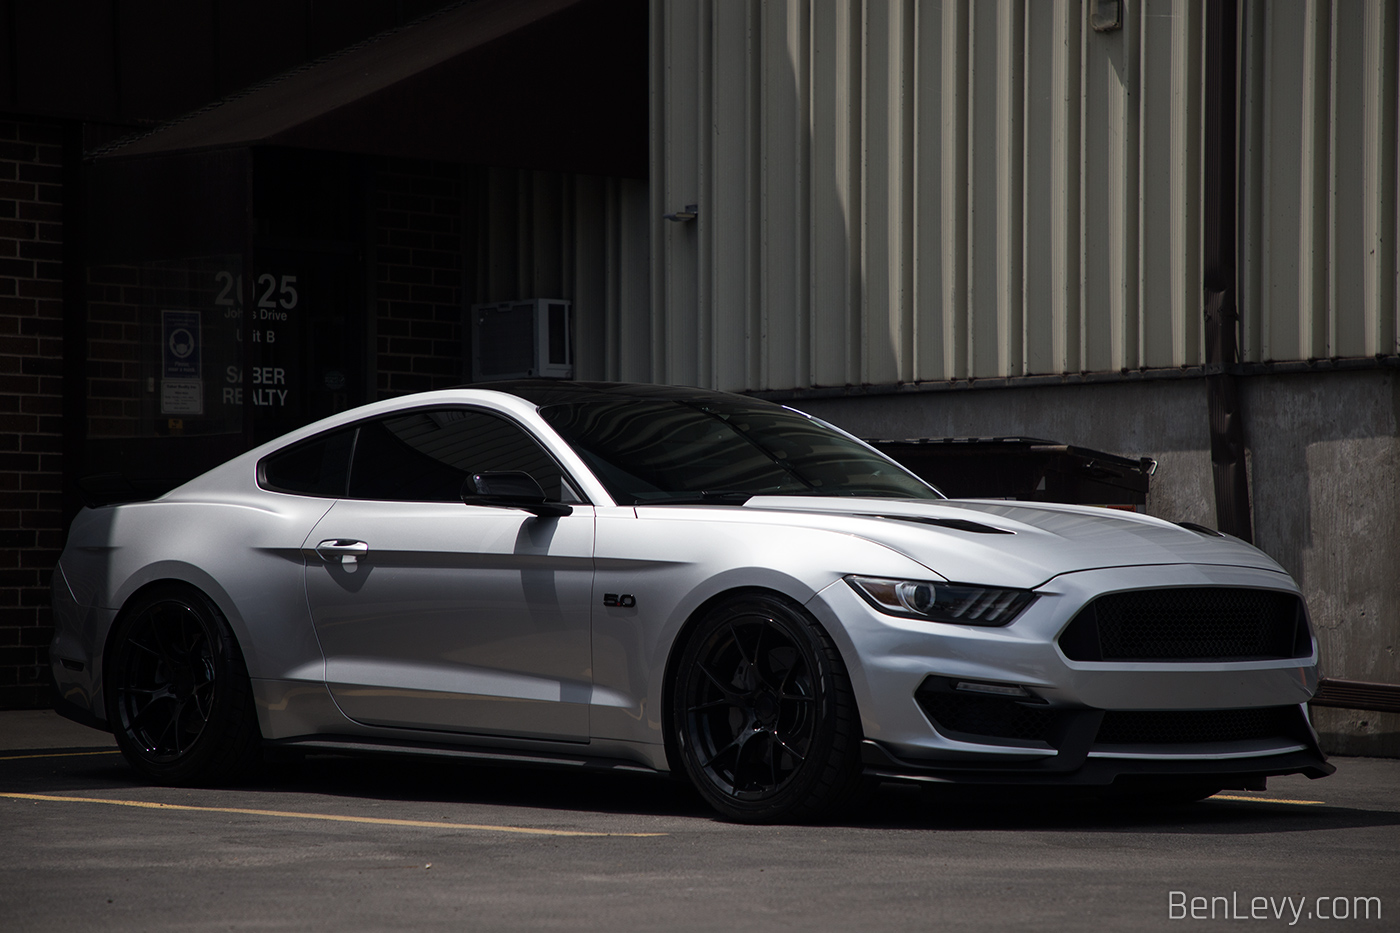 Silver S550 Ford Mustang GT - BenLevy.com